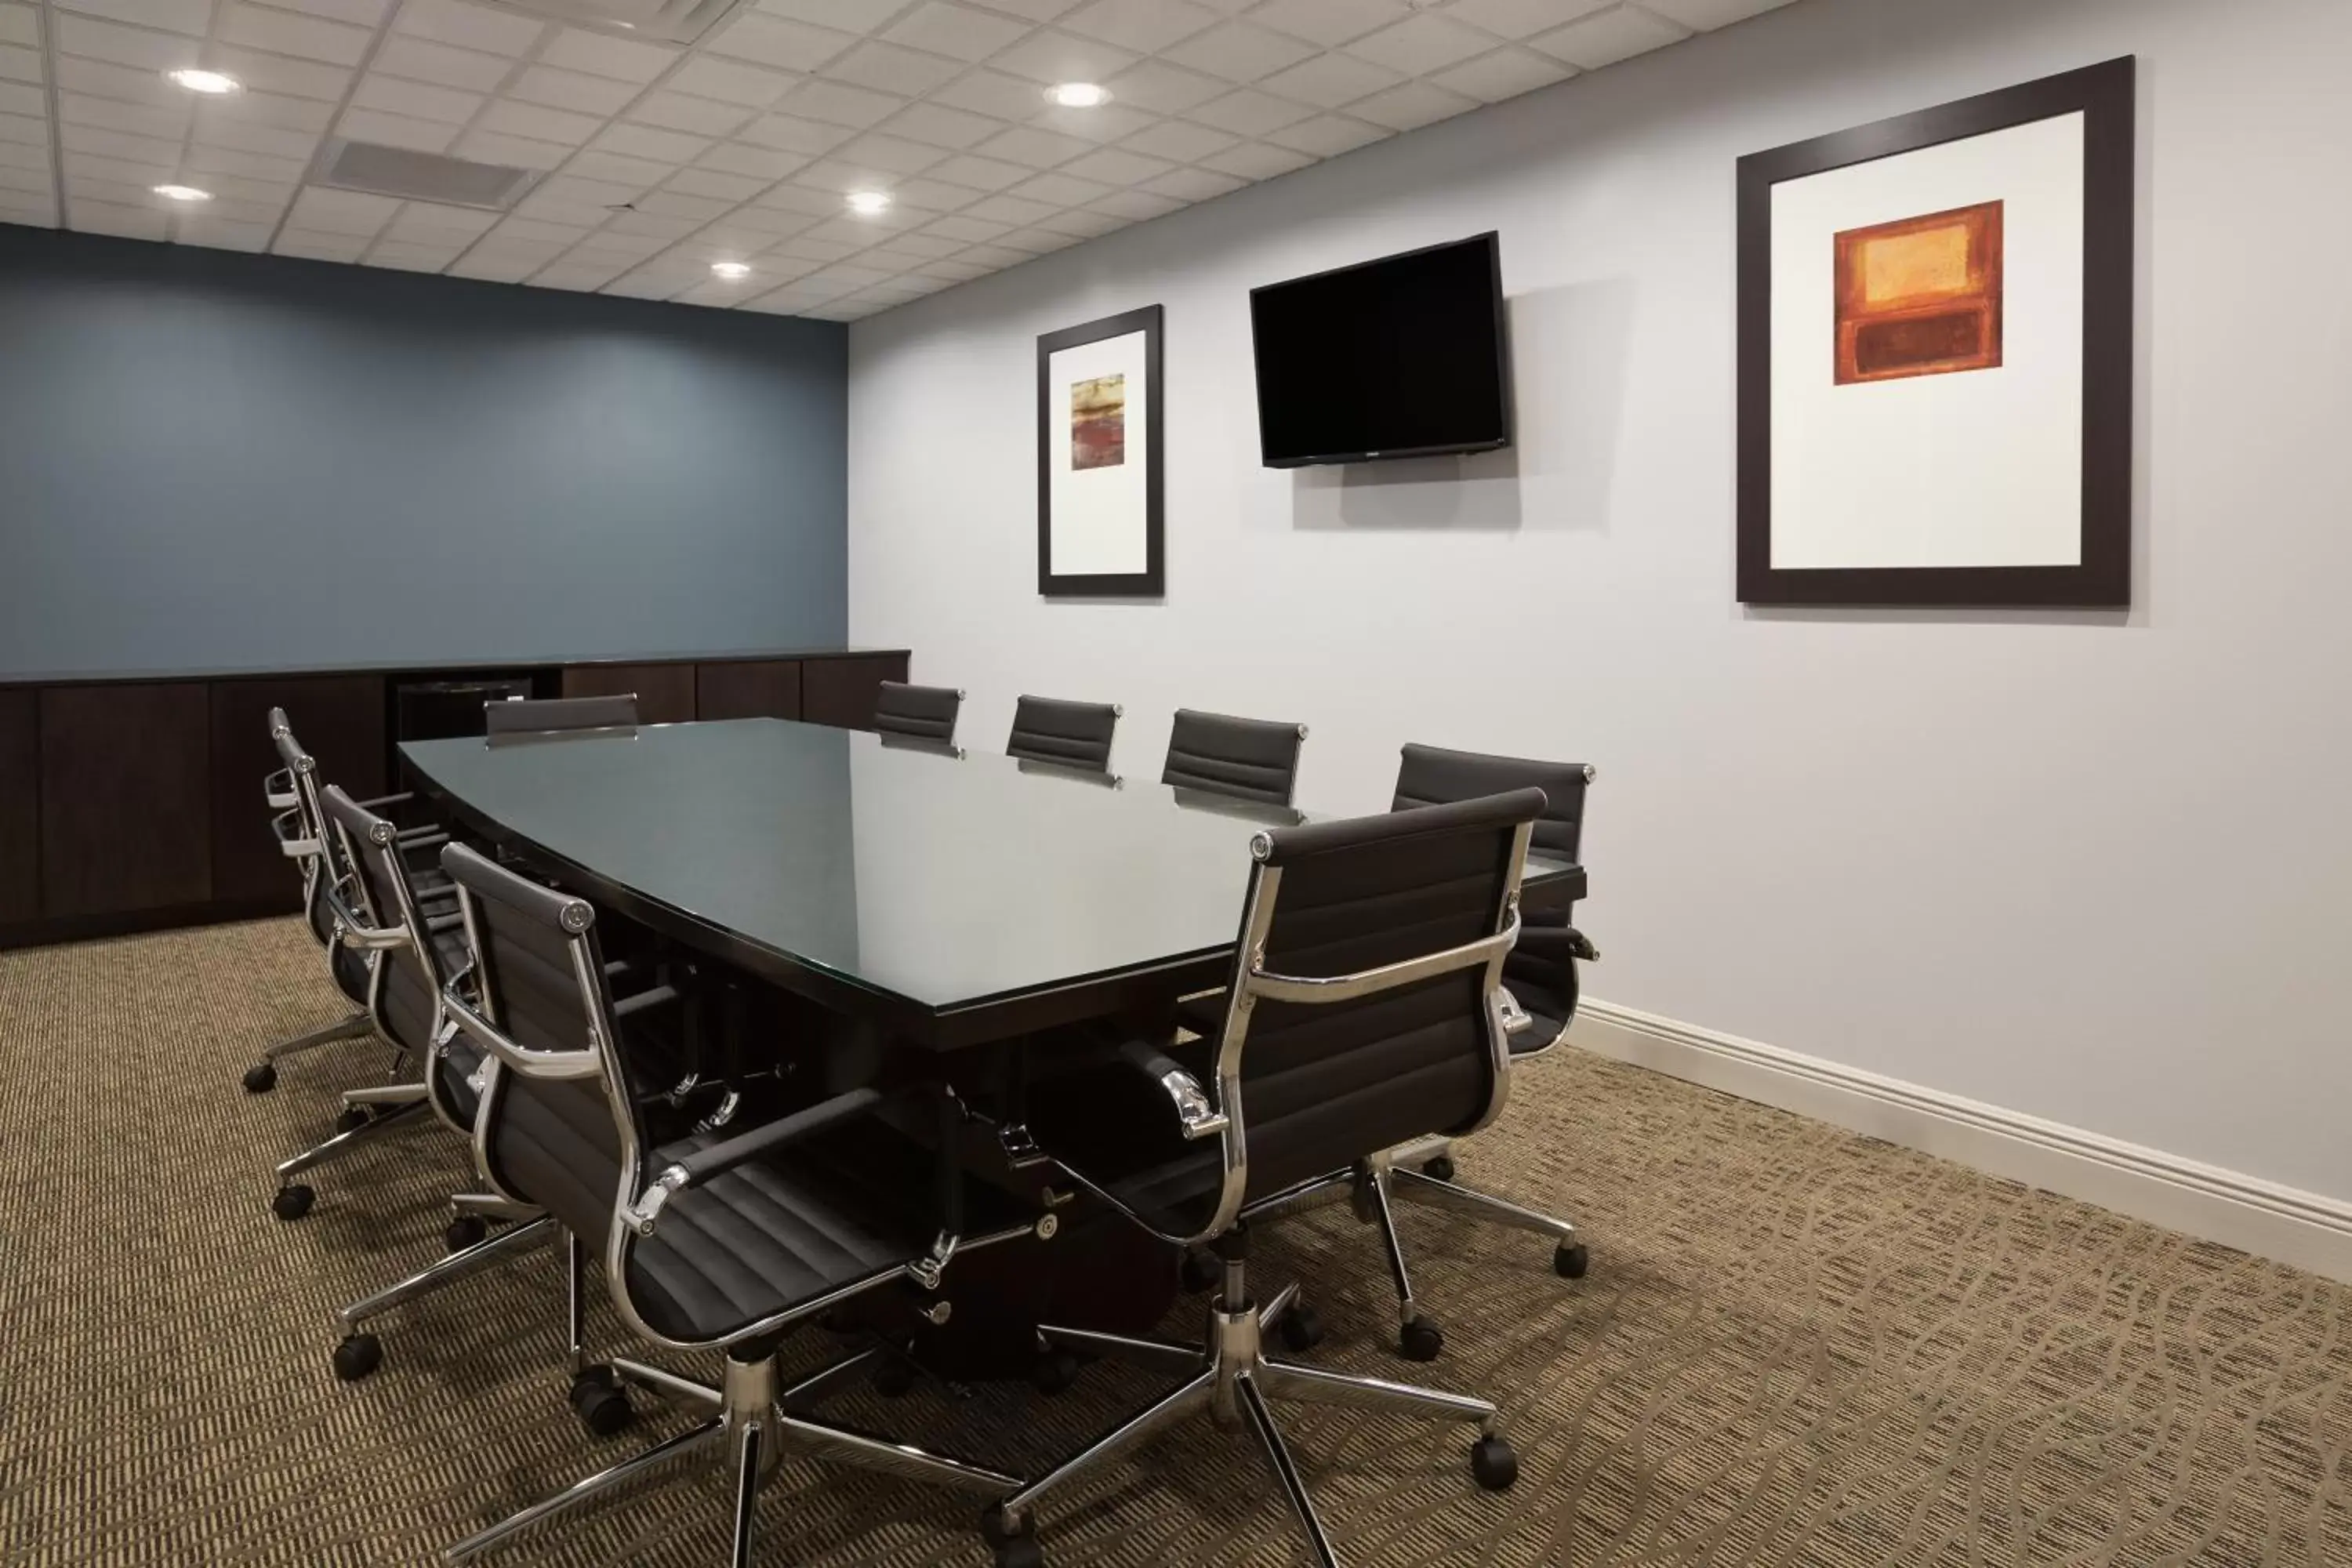 Business facilities in Wingate Slidell New Orleans